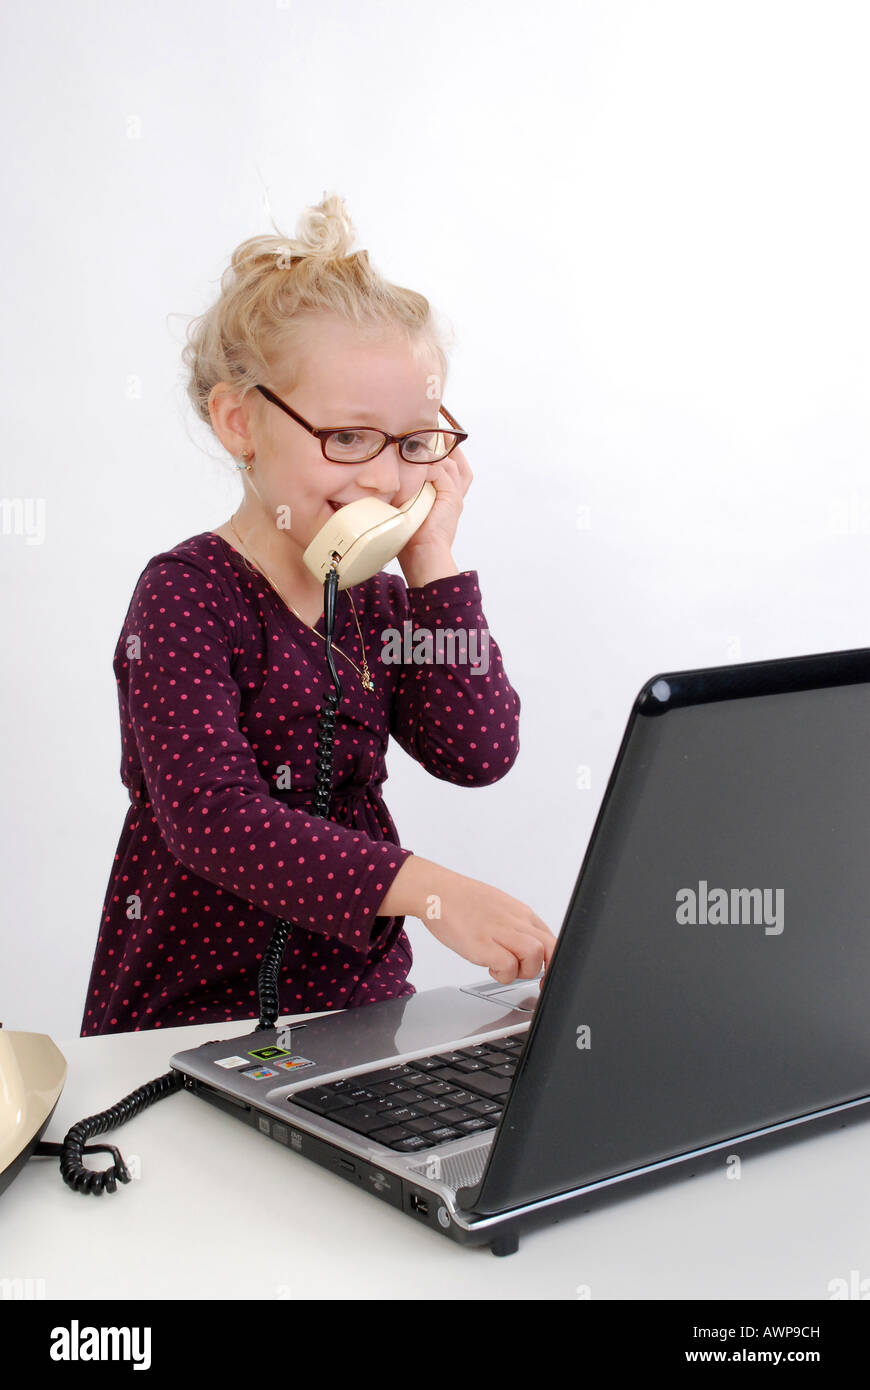 child and computer Stock Photo